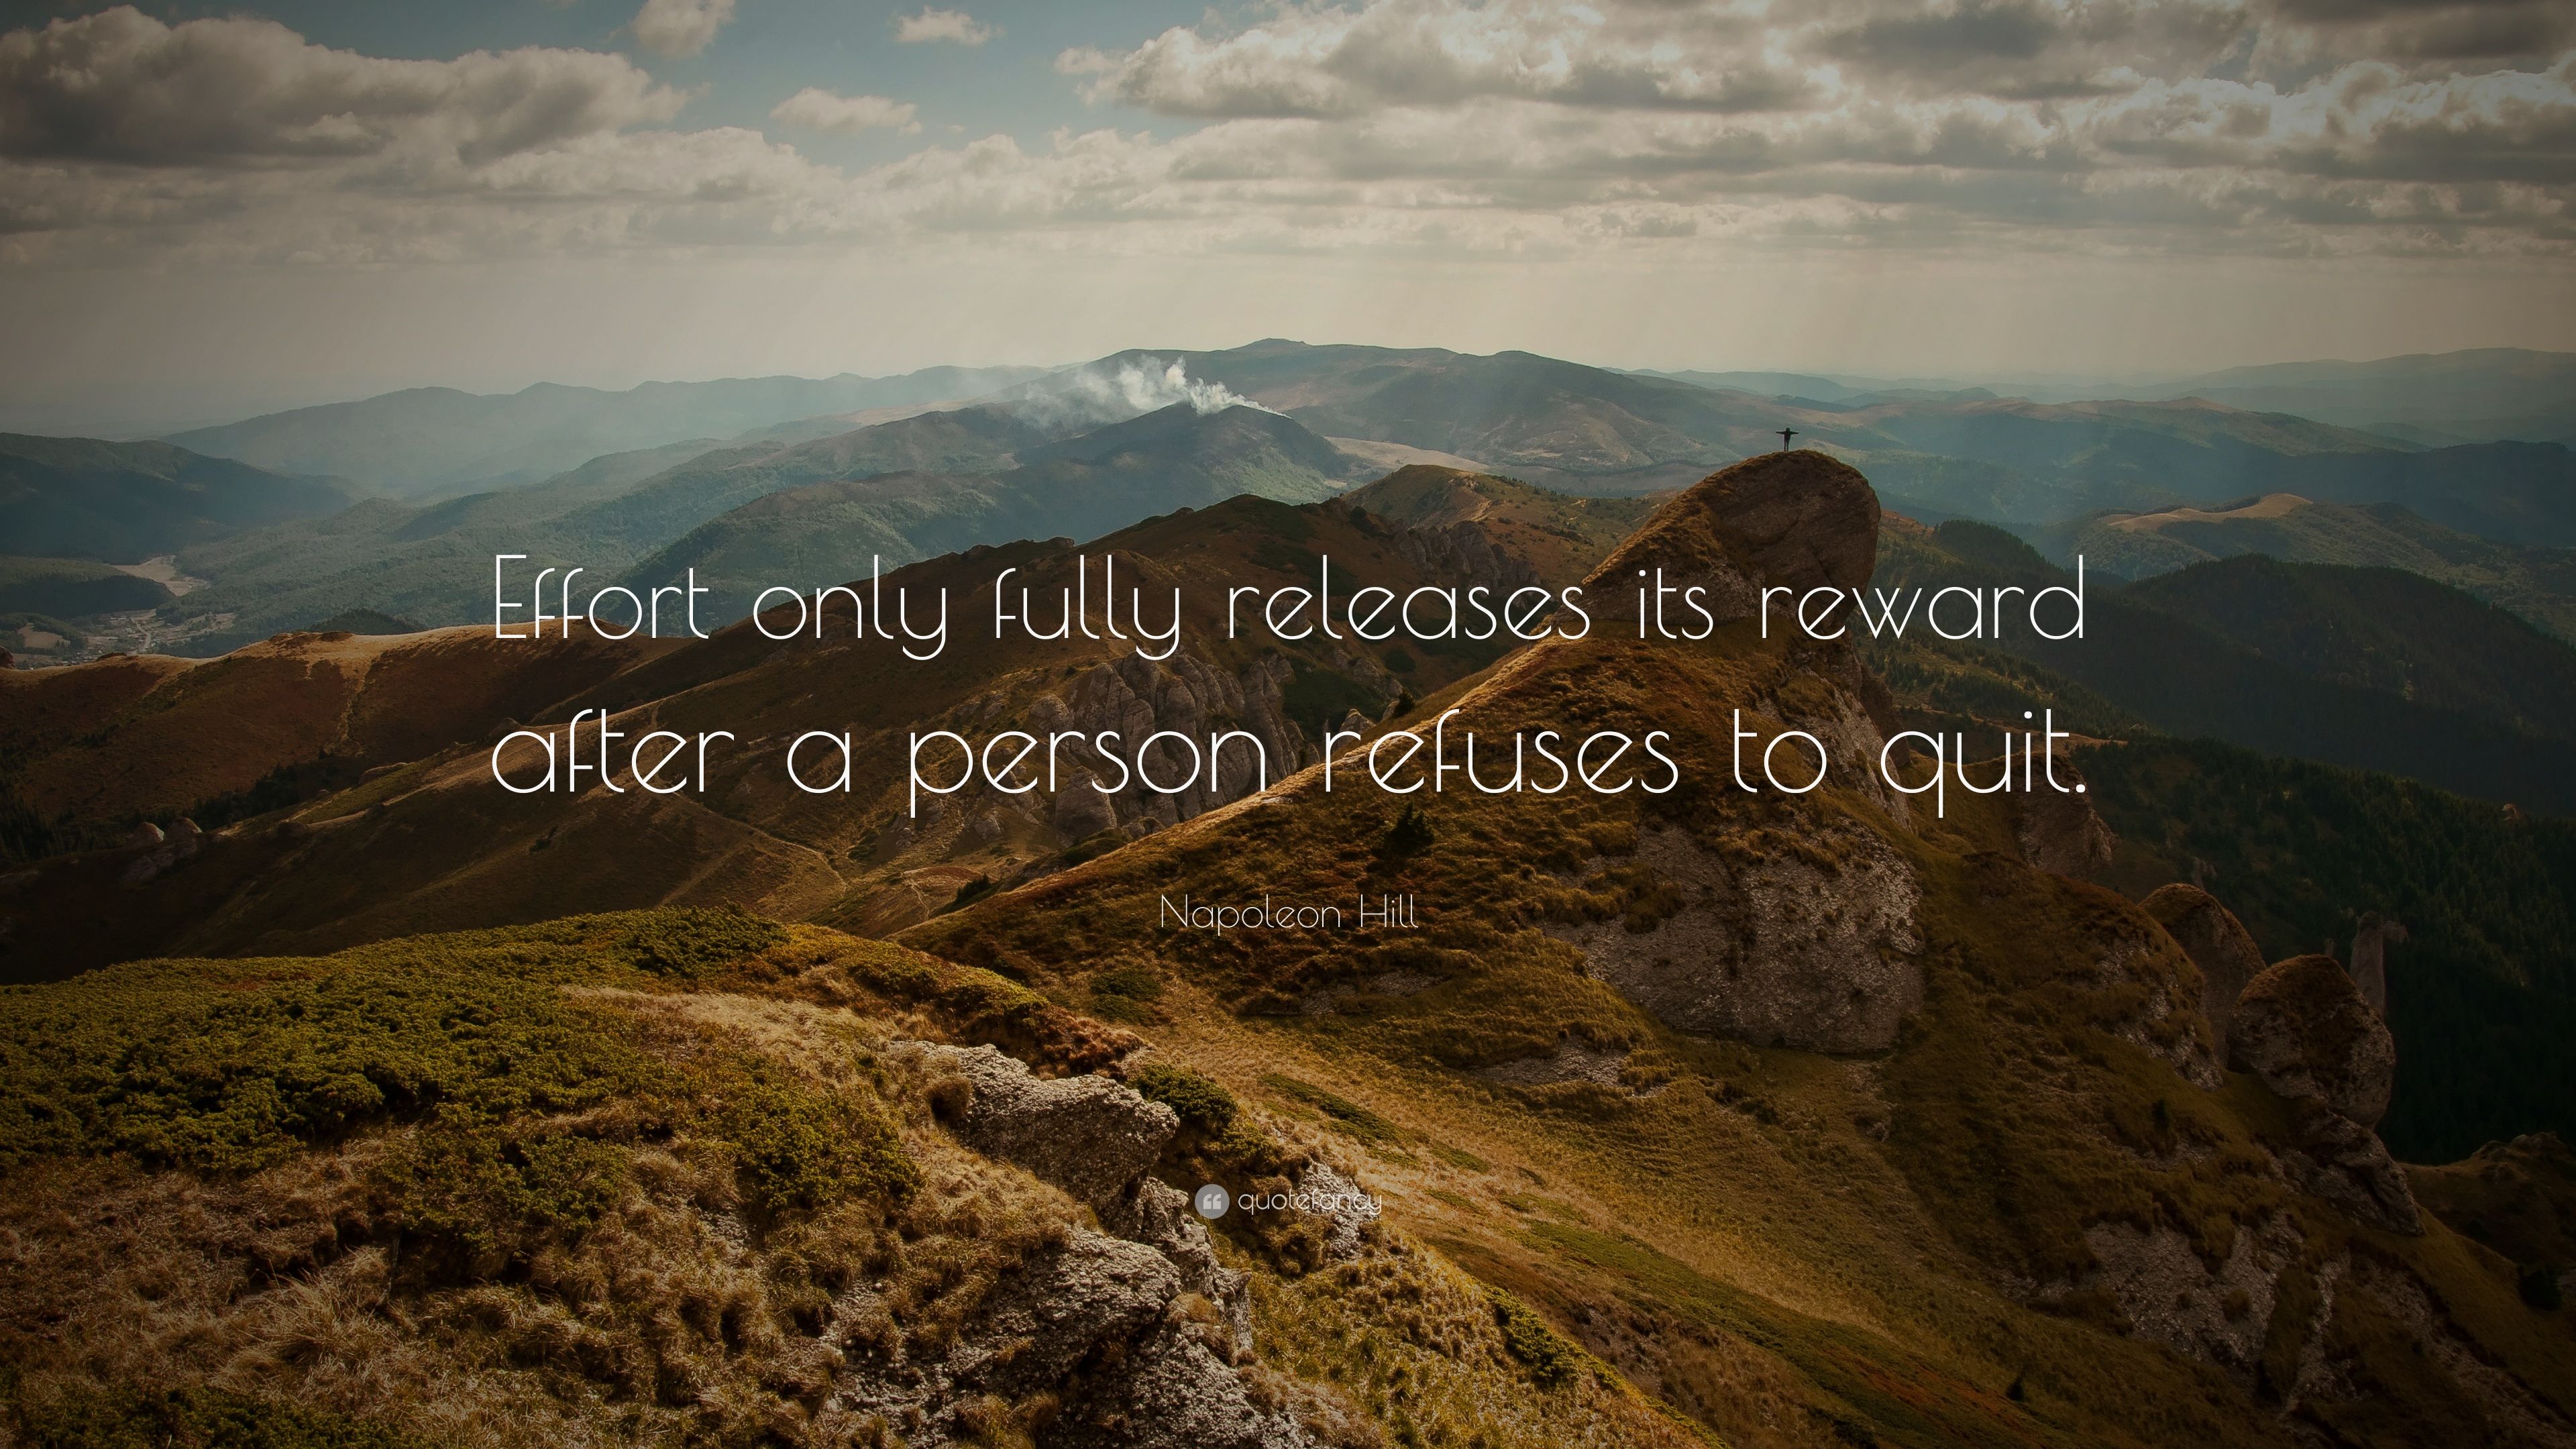 Napoleon Hill Quote: “Effort only fully releases its reward after a